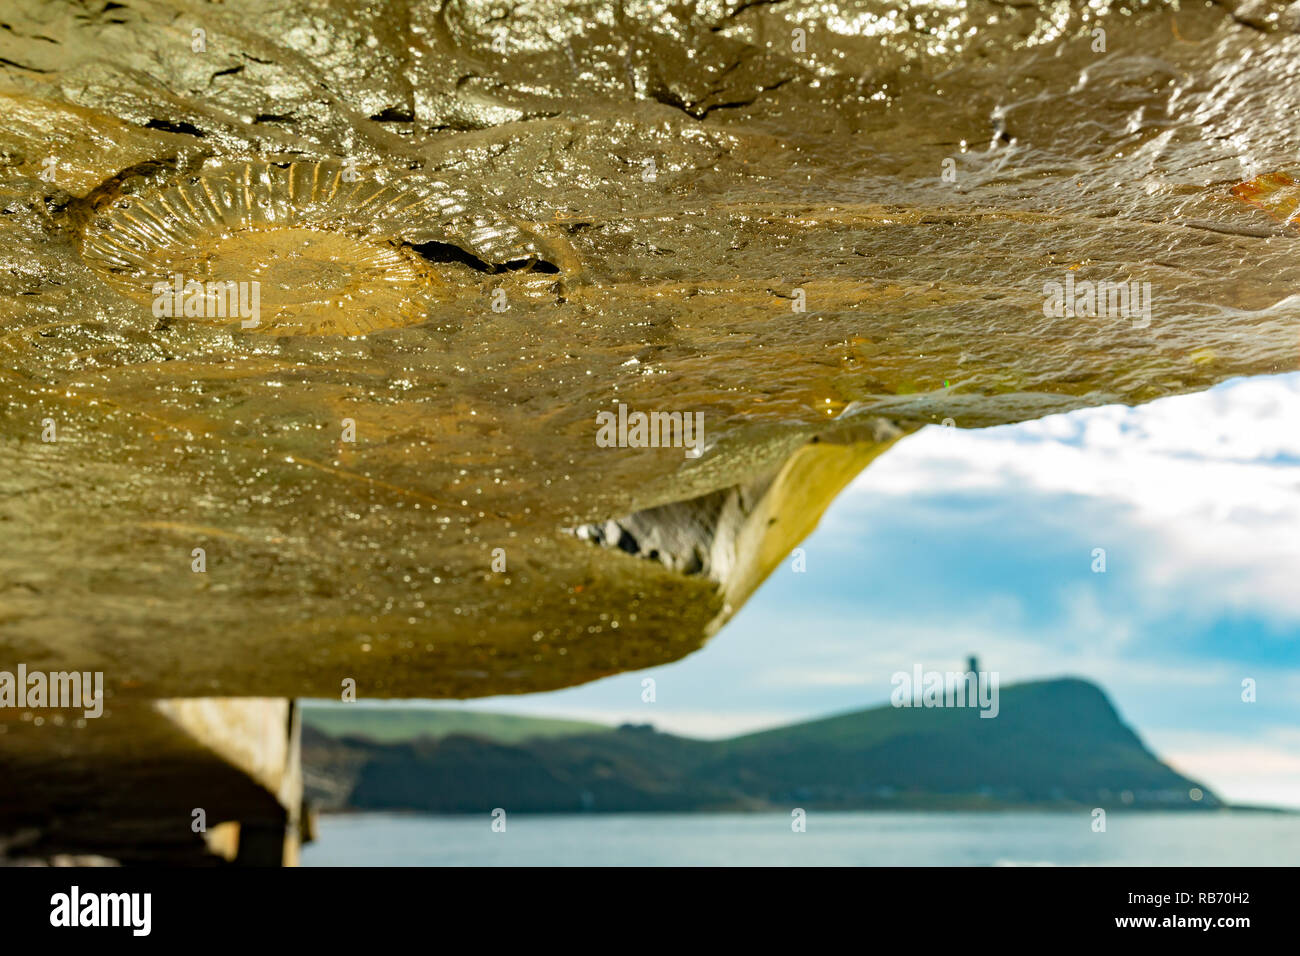 Landscape photograph taken from underneath cliff face overhang focused on Ammonite body fossil with Clavell tower silhouetted in background at Kimmeri Stock Photo